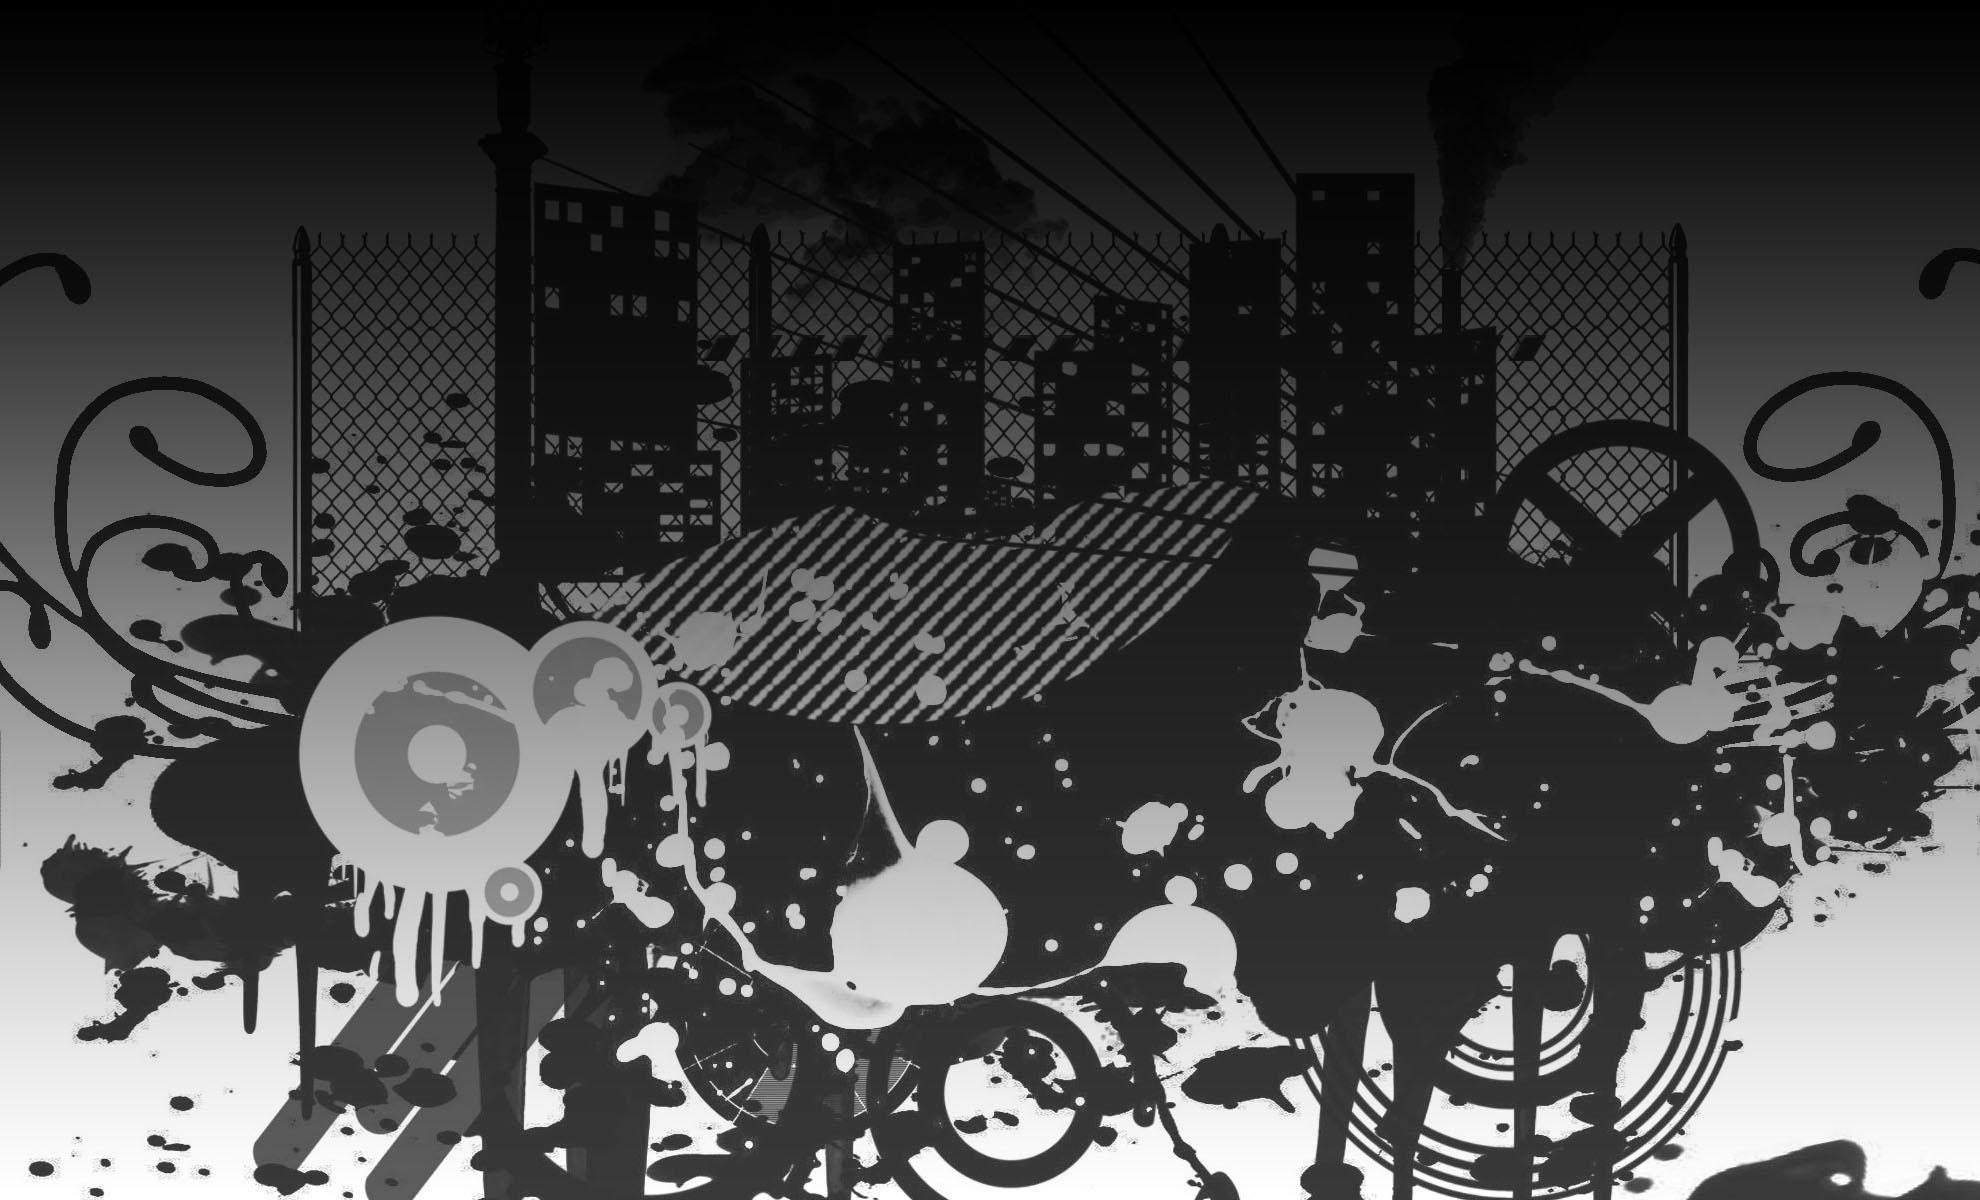 Background Black and White Art Designs